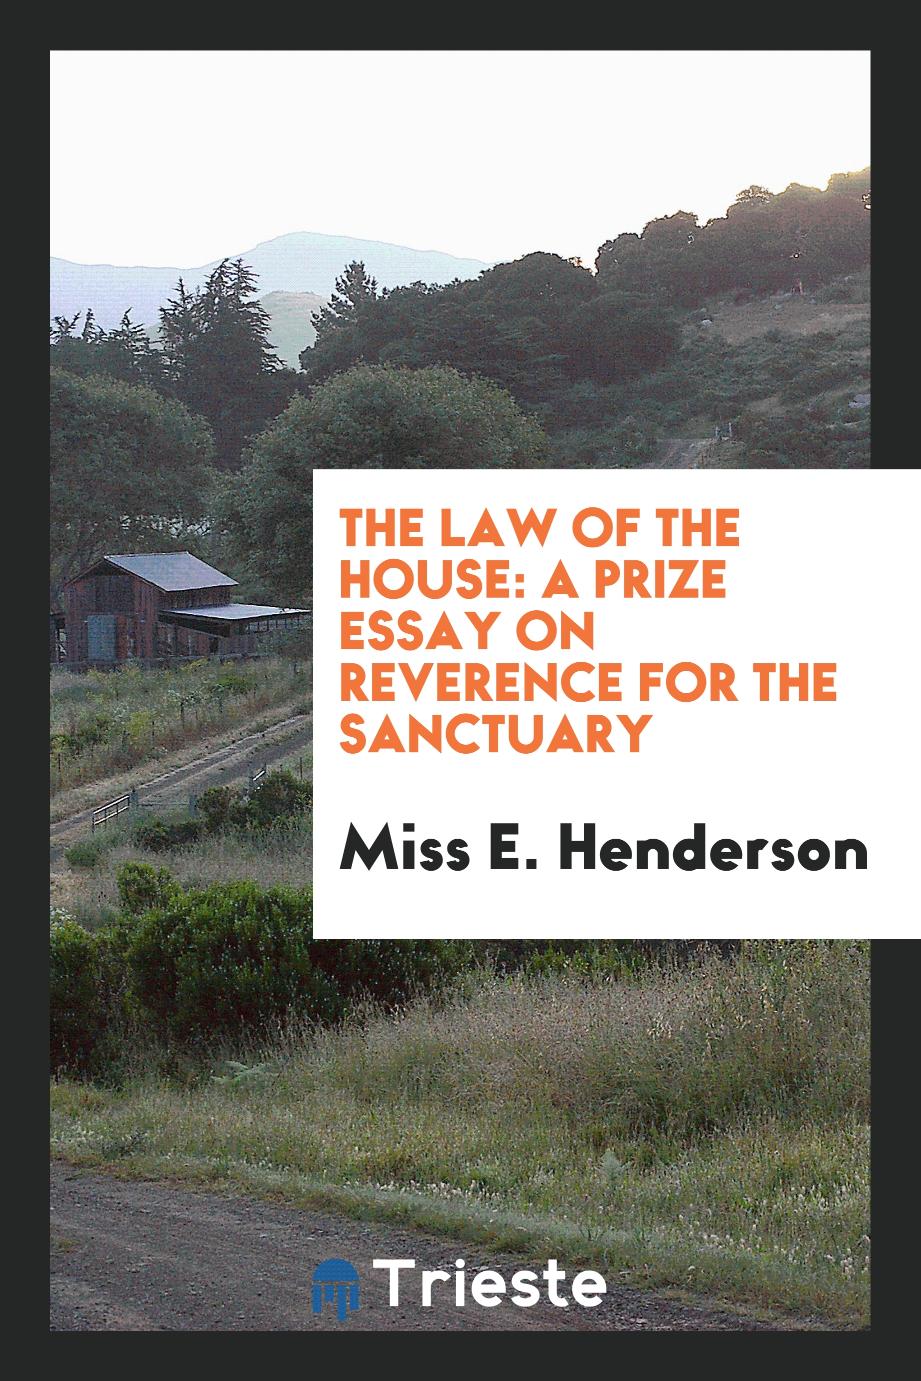 The Law of the House: A Prize Essay on Reverence for the Sanctuary